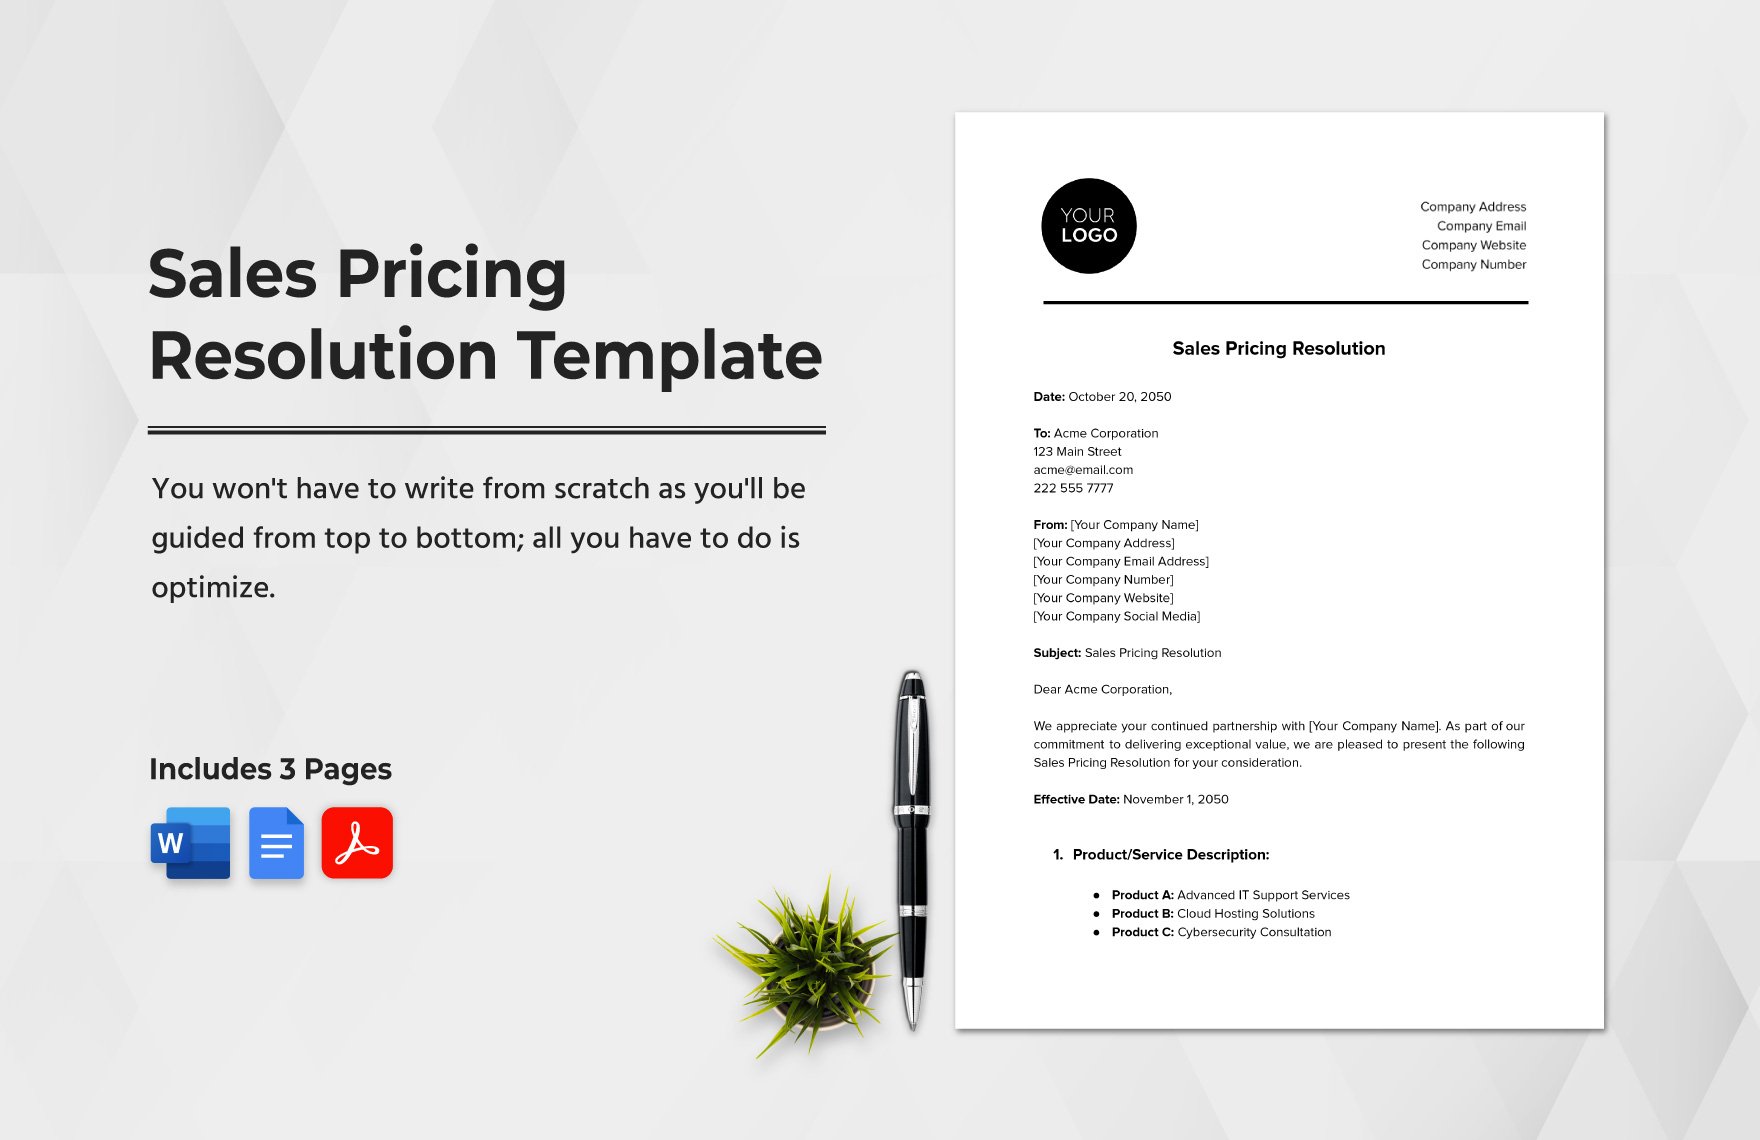 Sales Pricing Resolution Template in Word, Google Docs, PDF